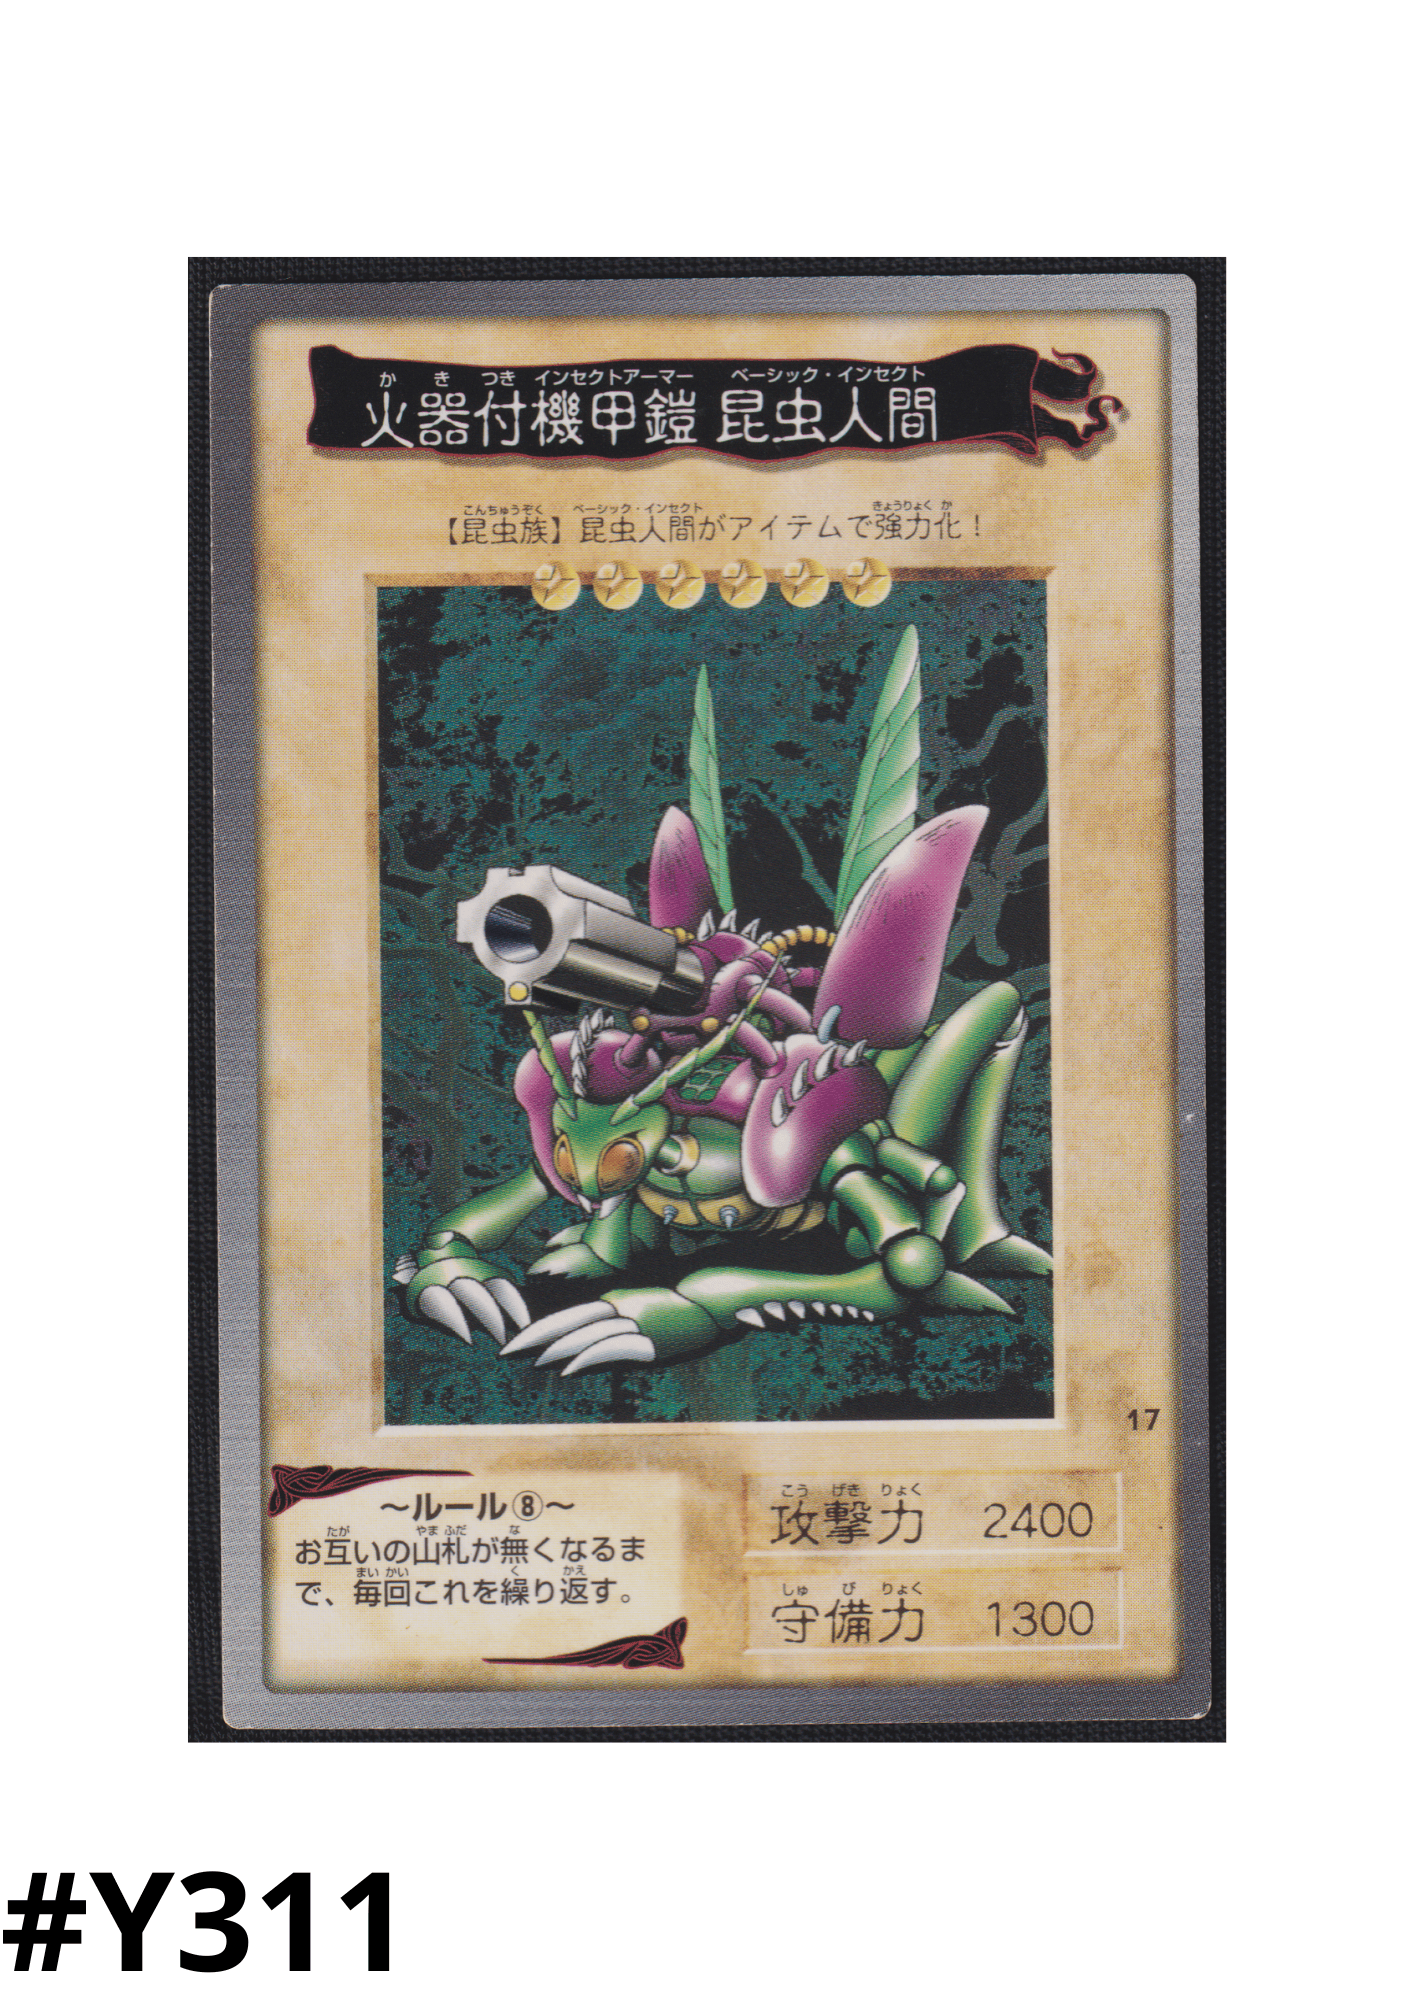 Yu-Gi-Oh! | Bandai Card No.17 | Armored Basic Insect with Laser Cannon ChitoroShop